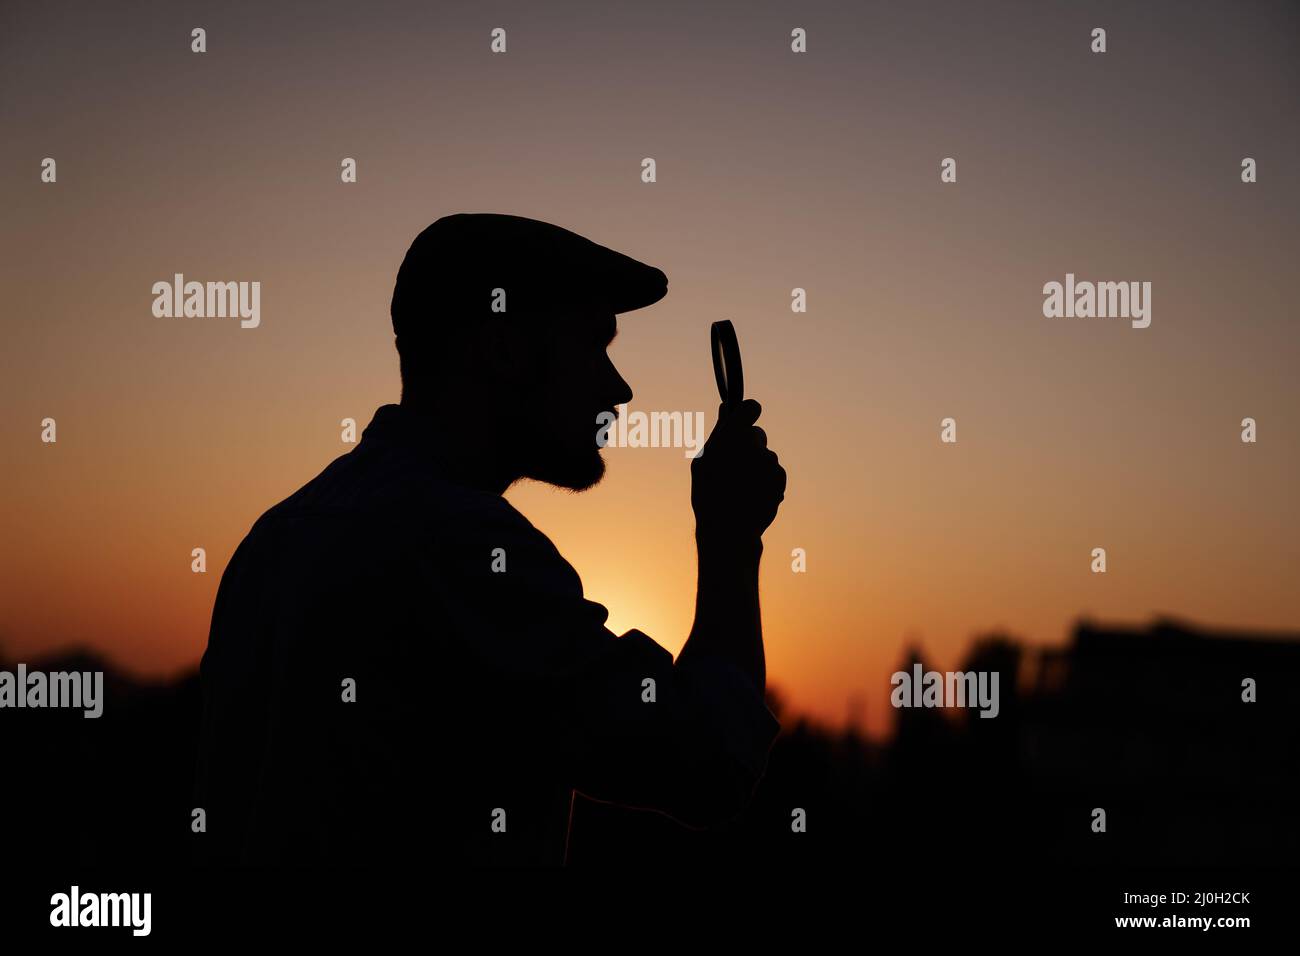 Silhouette portrait of man investigator in peaking cap looking with magnifying at side. Man searching sales or discounts at sunset using loupe with sun on background. High quality image Stock Photo